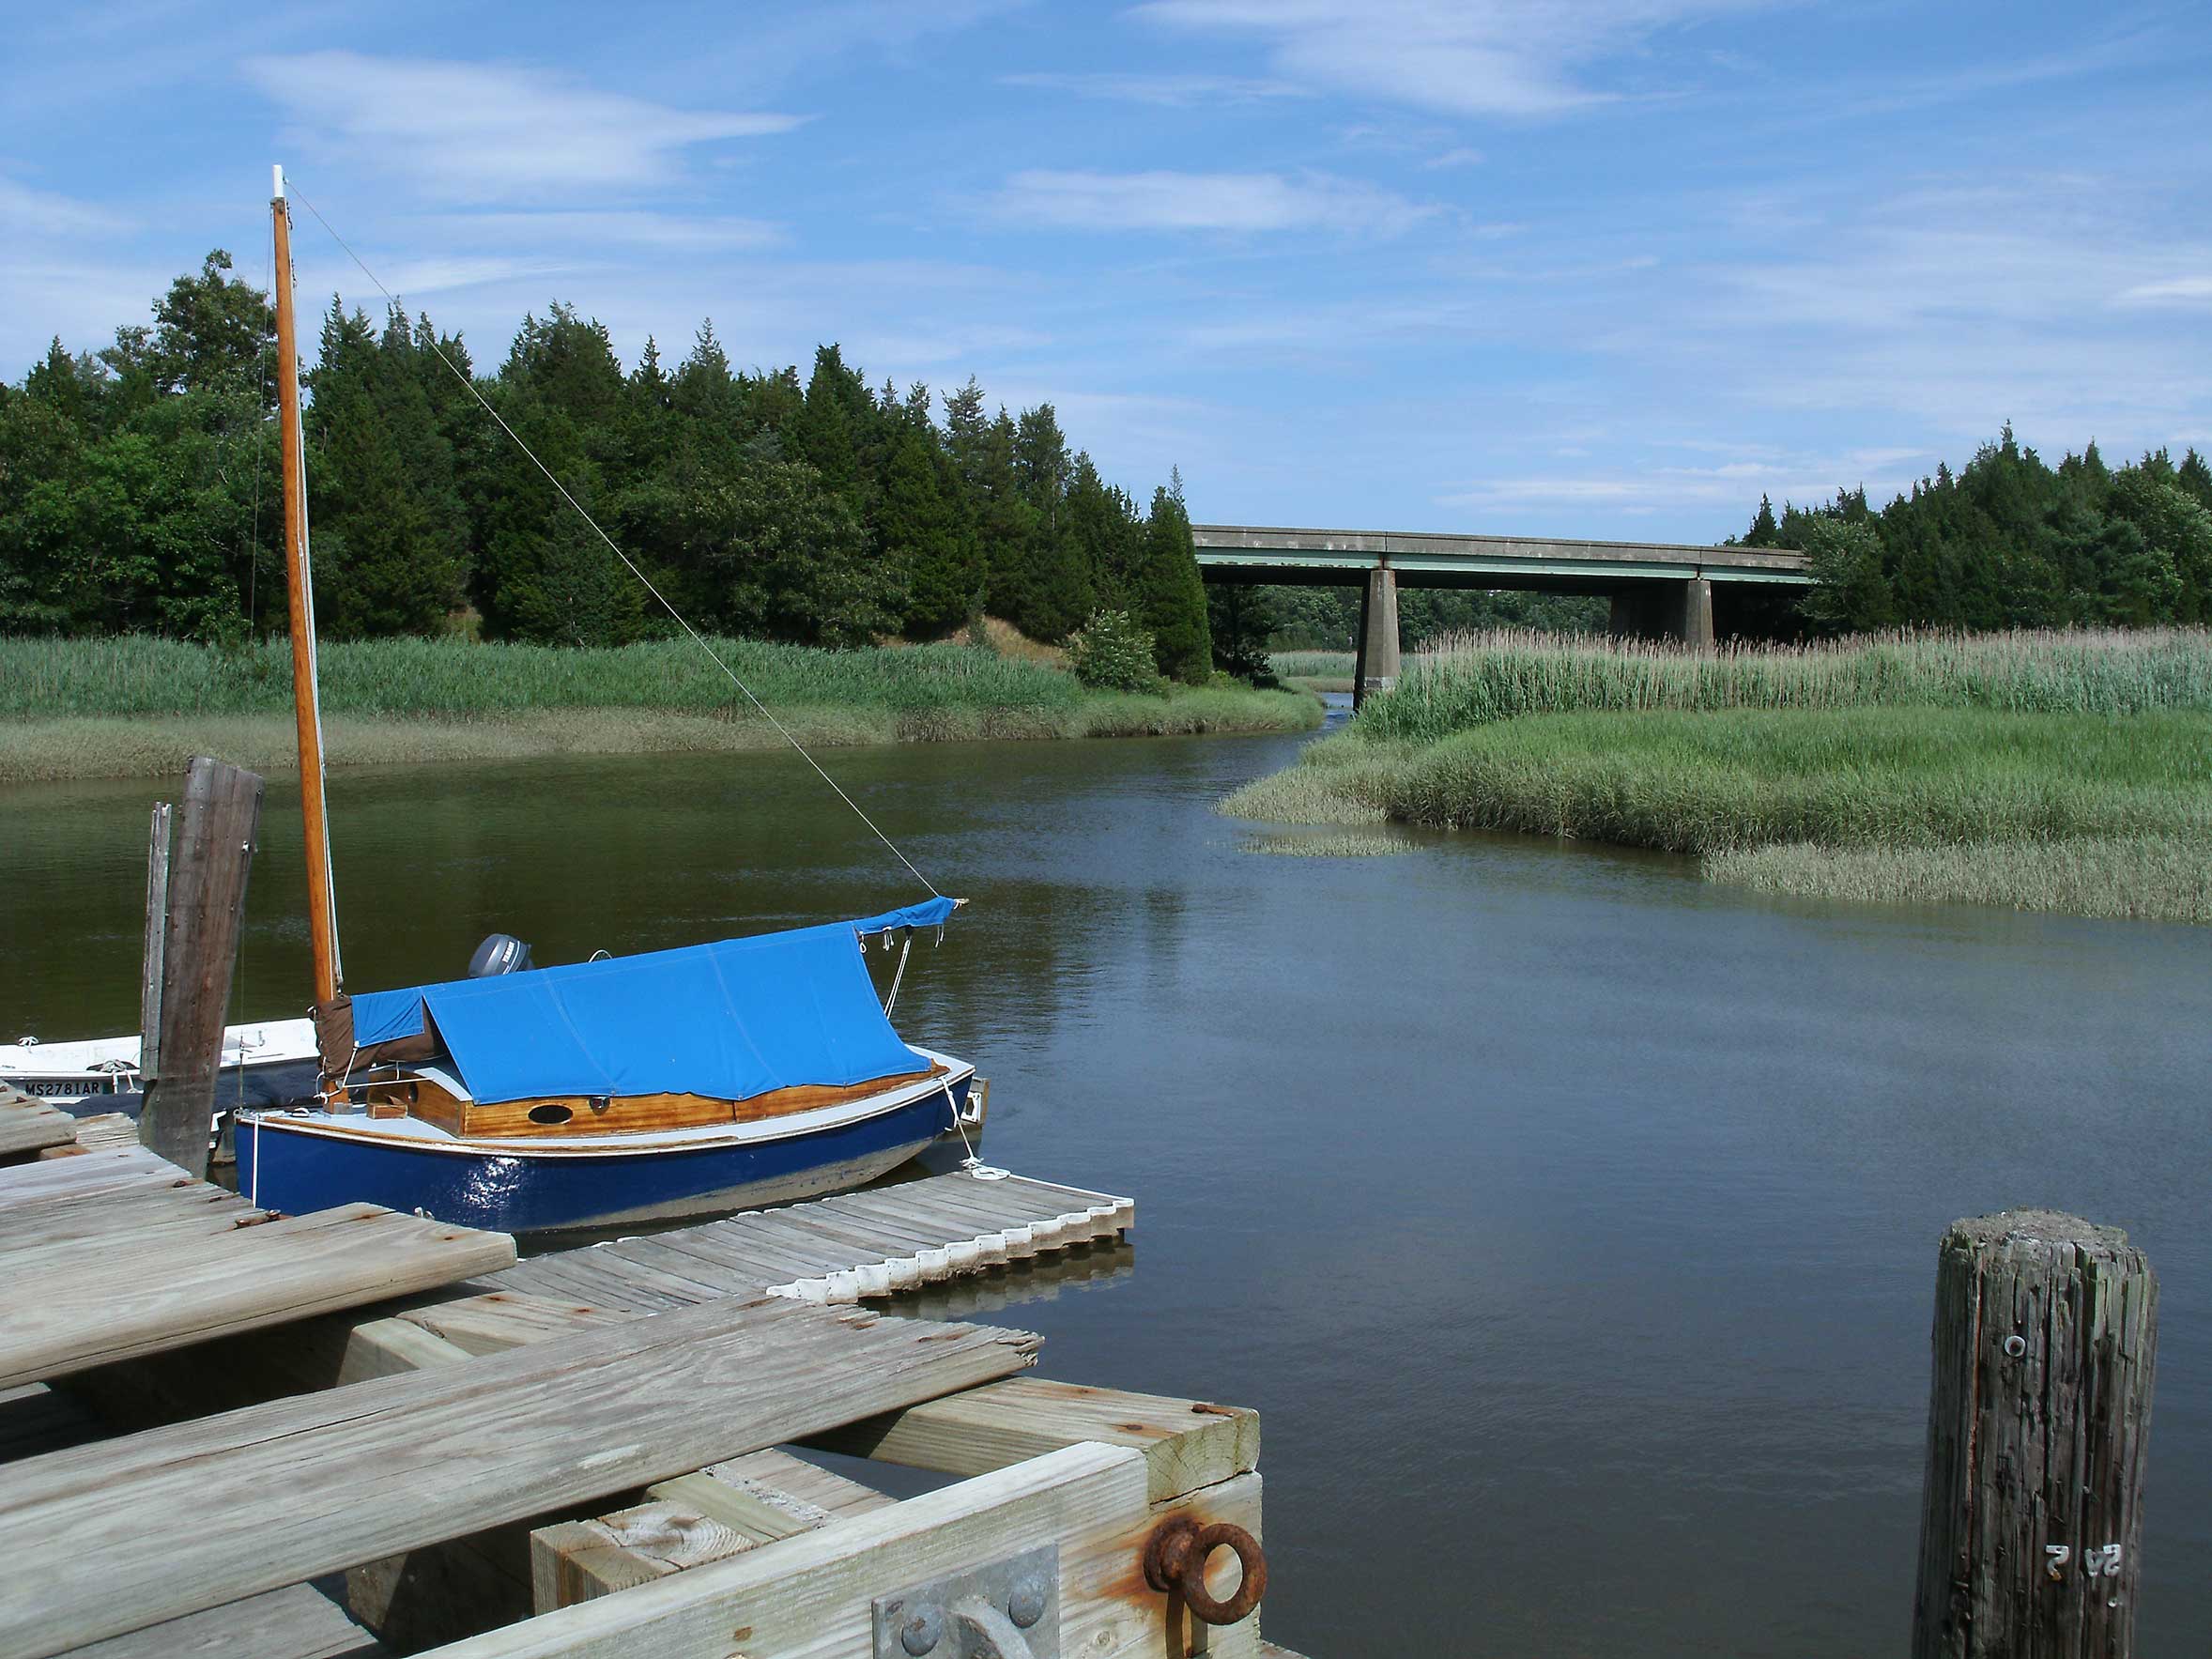 Photograph of Jones River with a boat on the dock in Kingston, MA